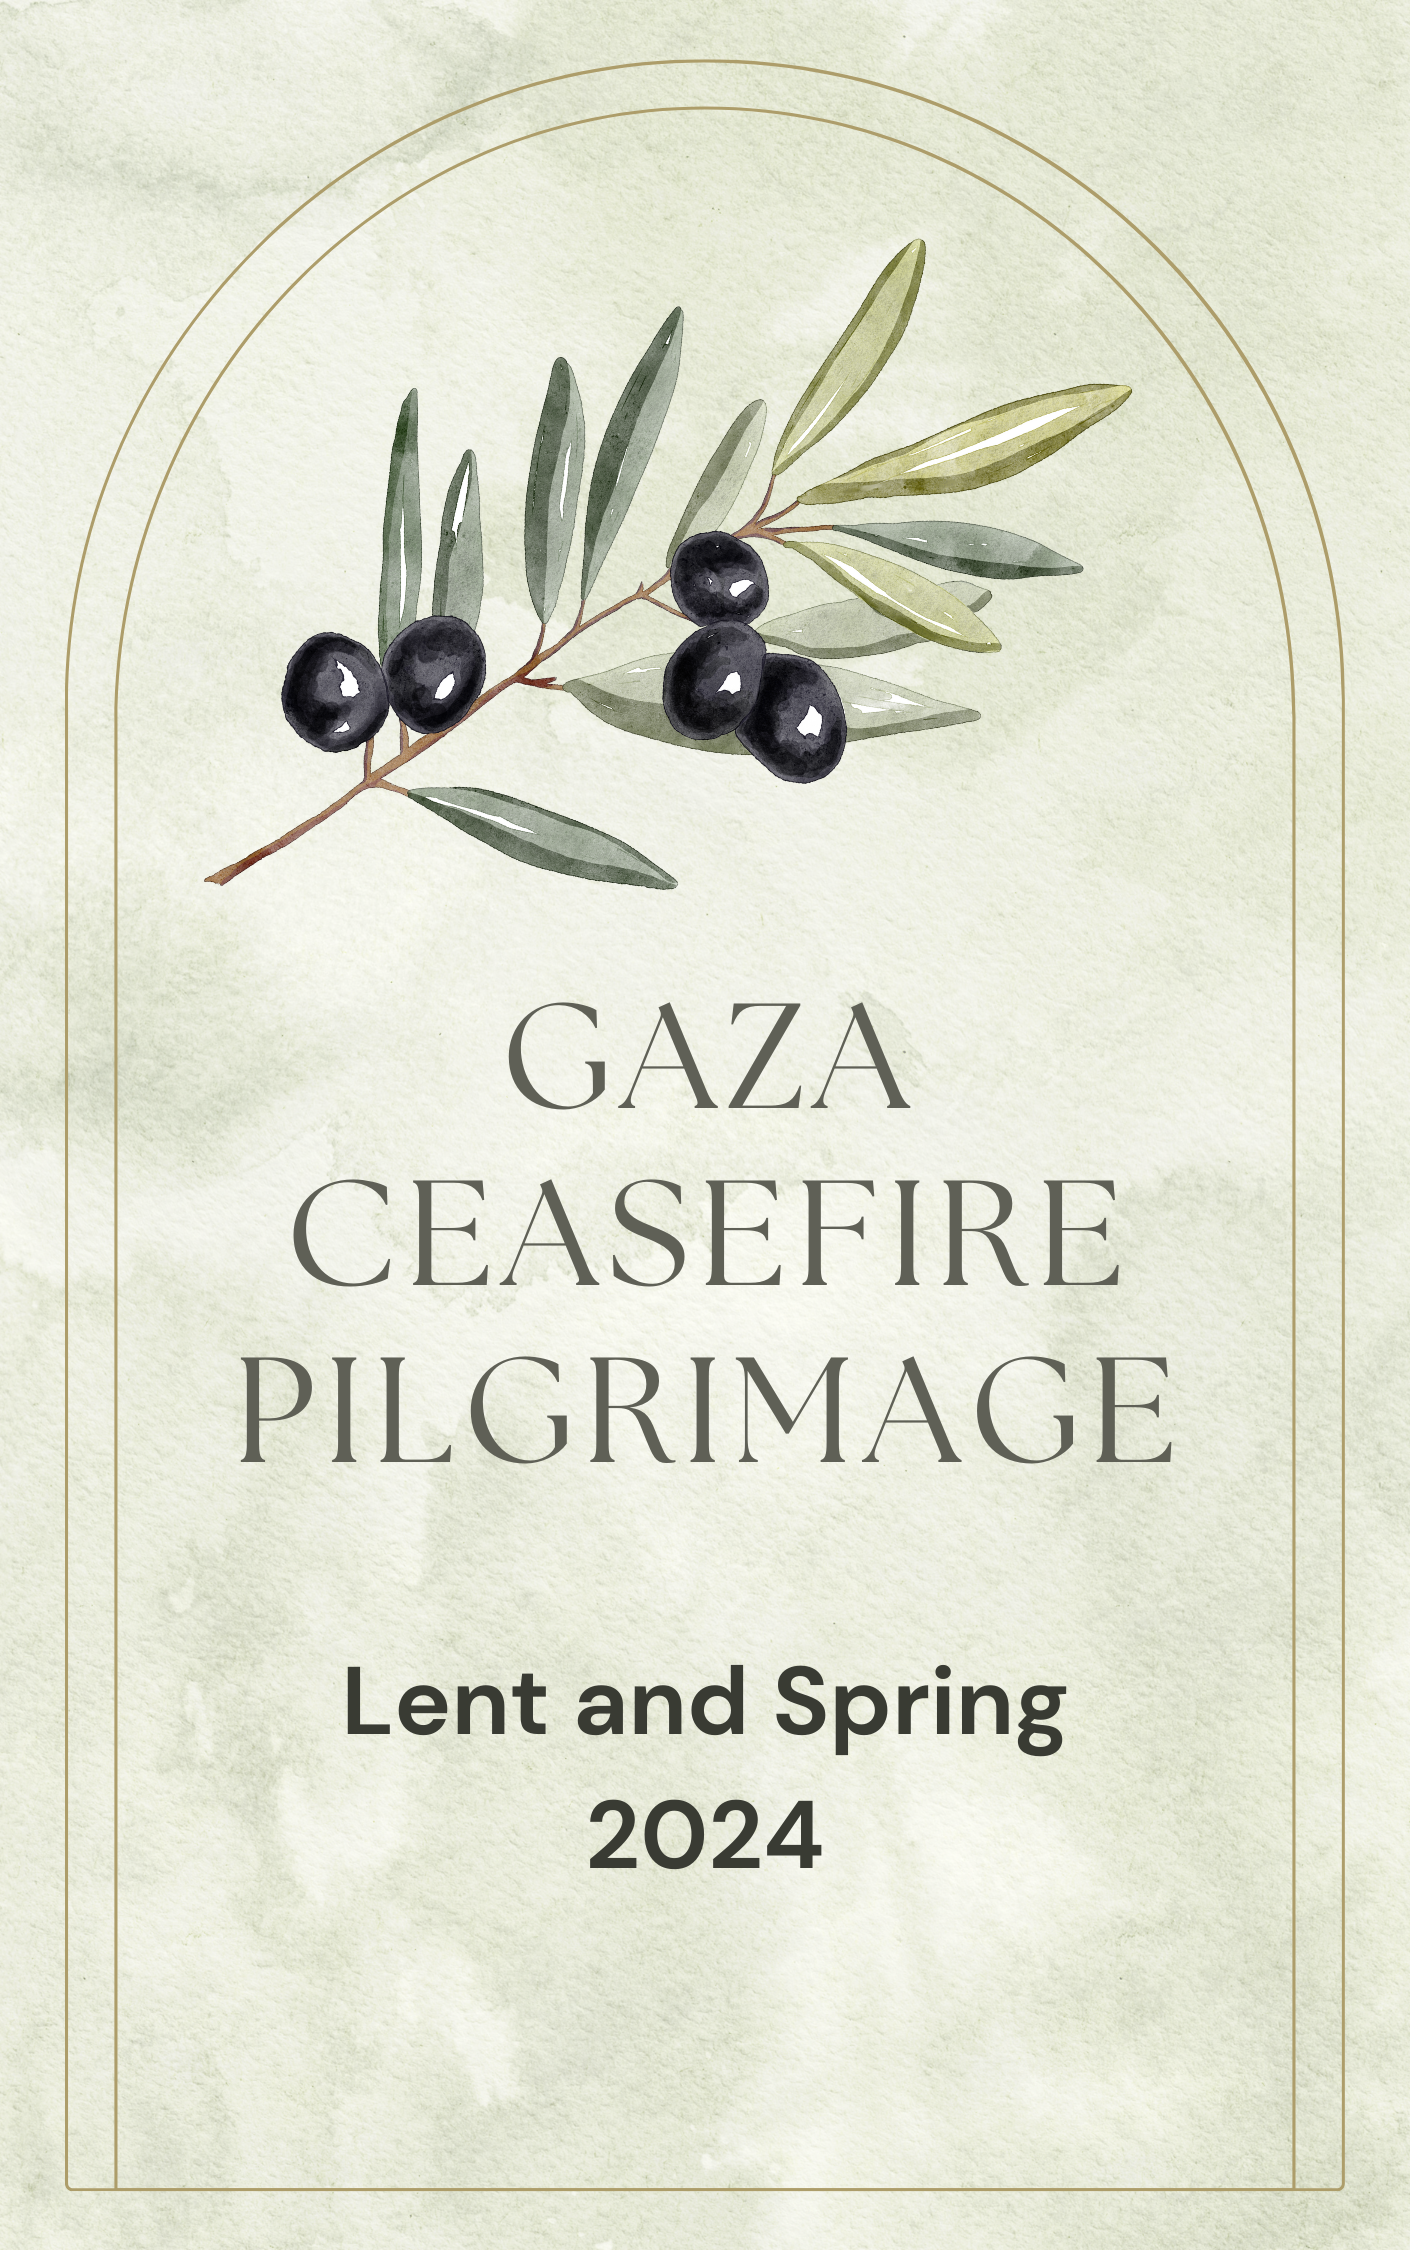 Text: Gaza Ceasefire Pilgrimage, overlaid on a parchment background, with a watercolour rendering of an olive branch.